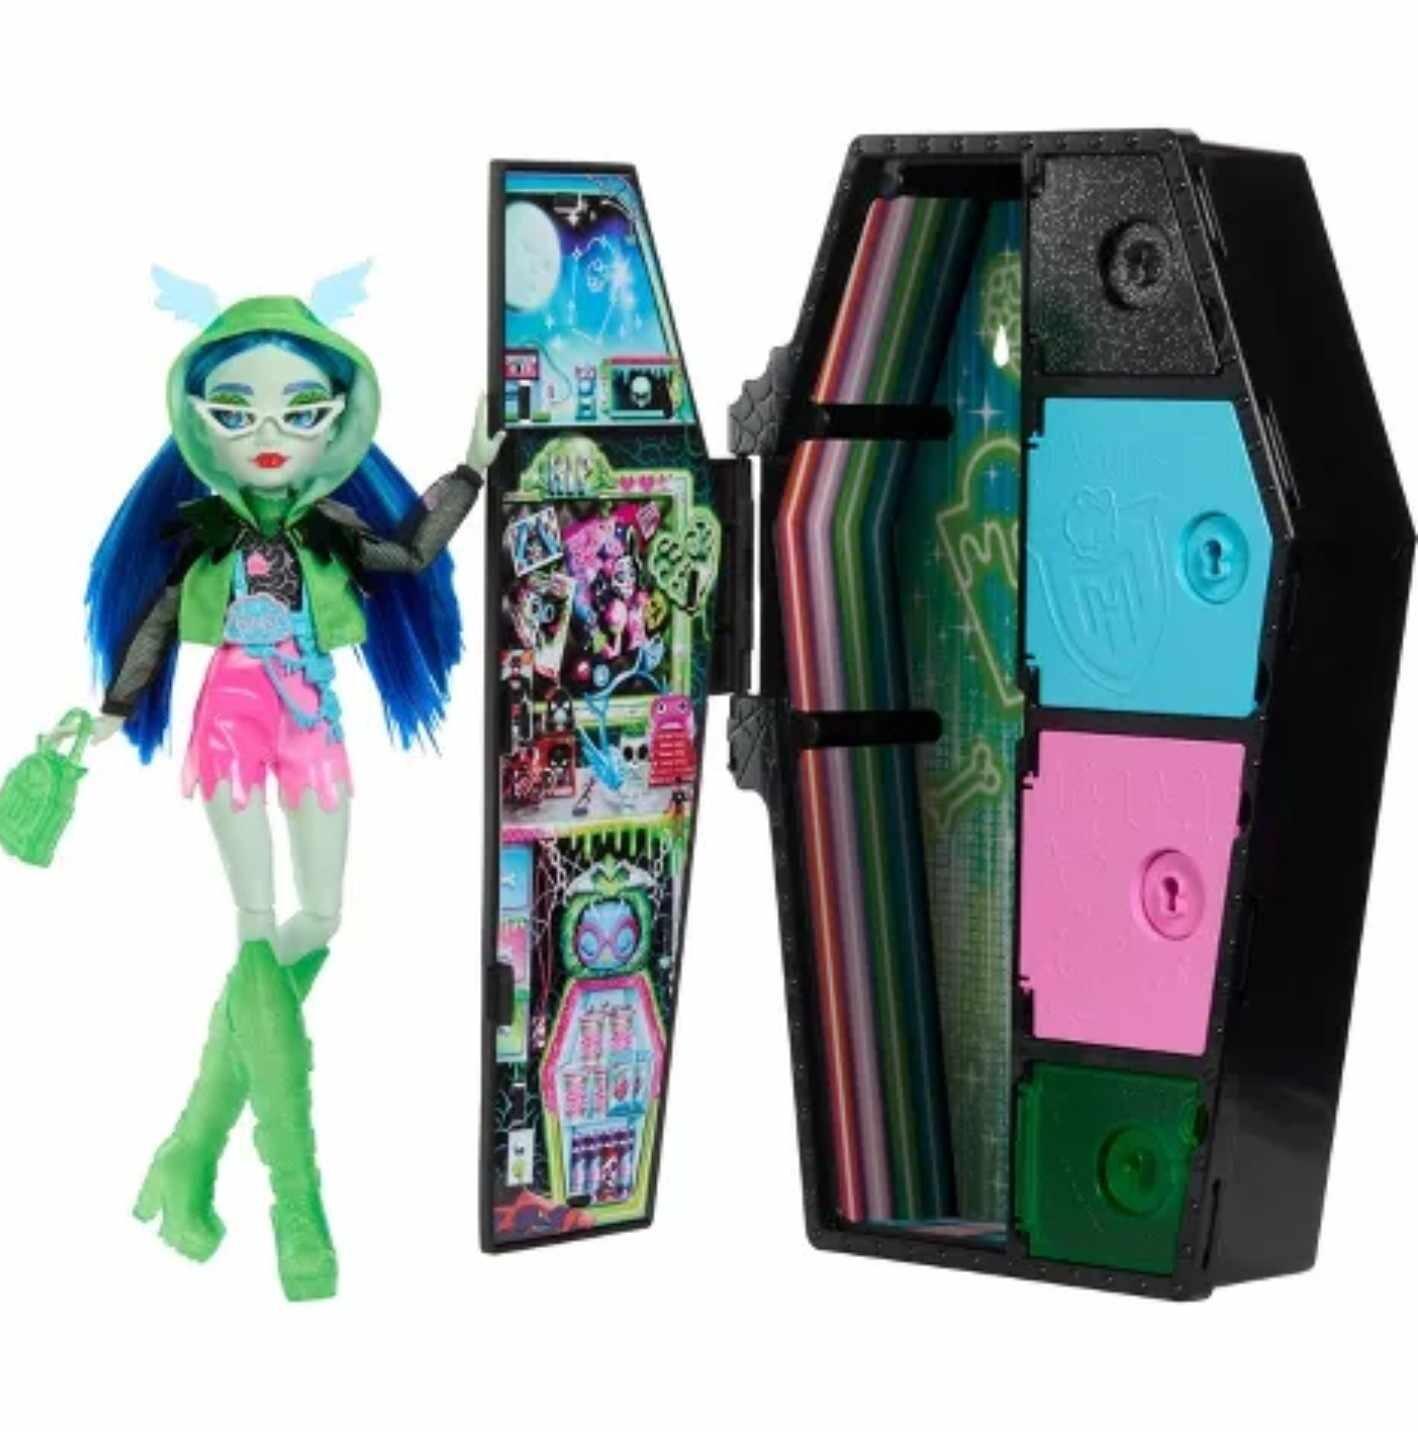 Monster High Doll and Fashion Set, Ghoulia Yelps Doll, Skulltimate Secrets: Neon Frights